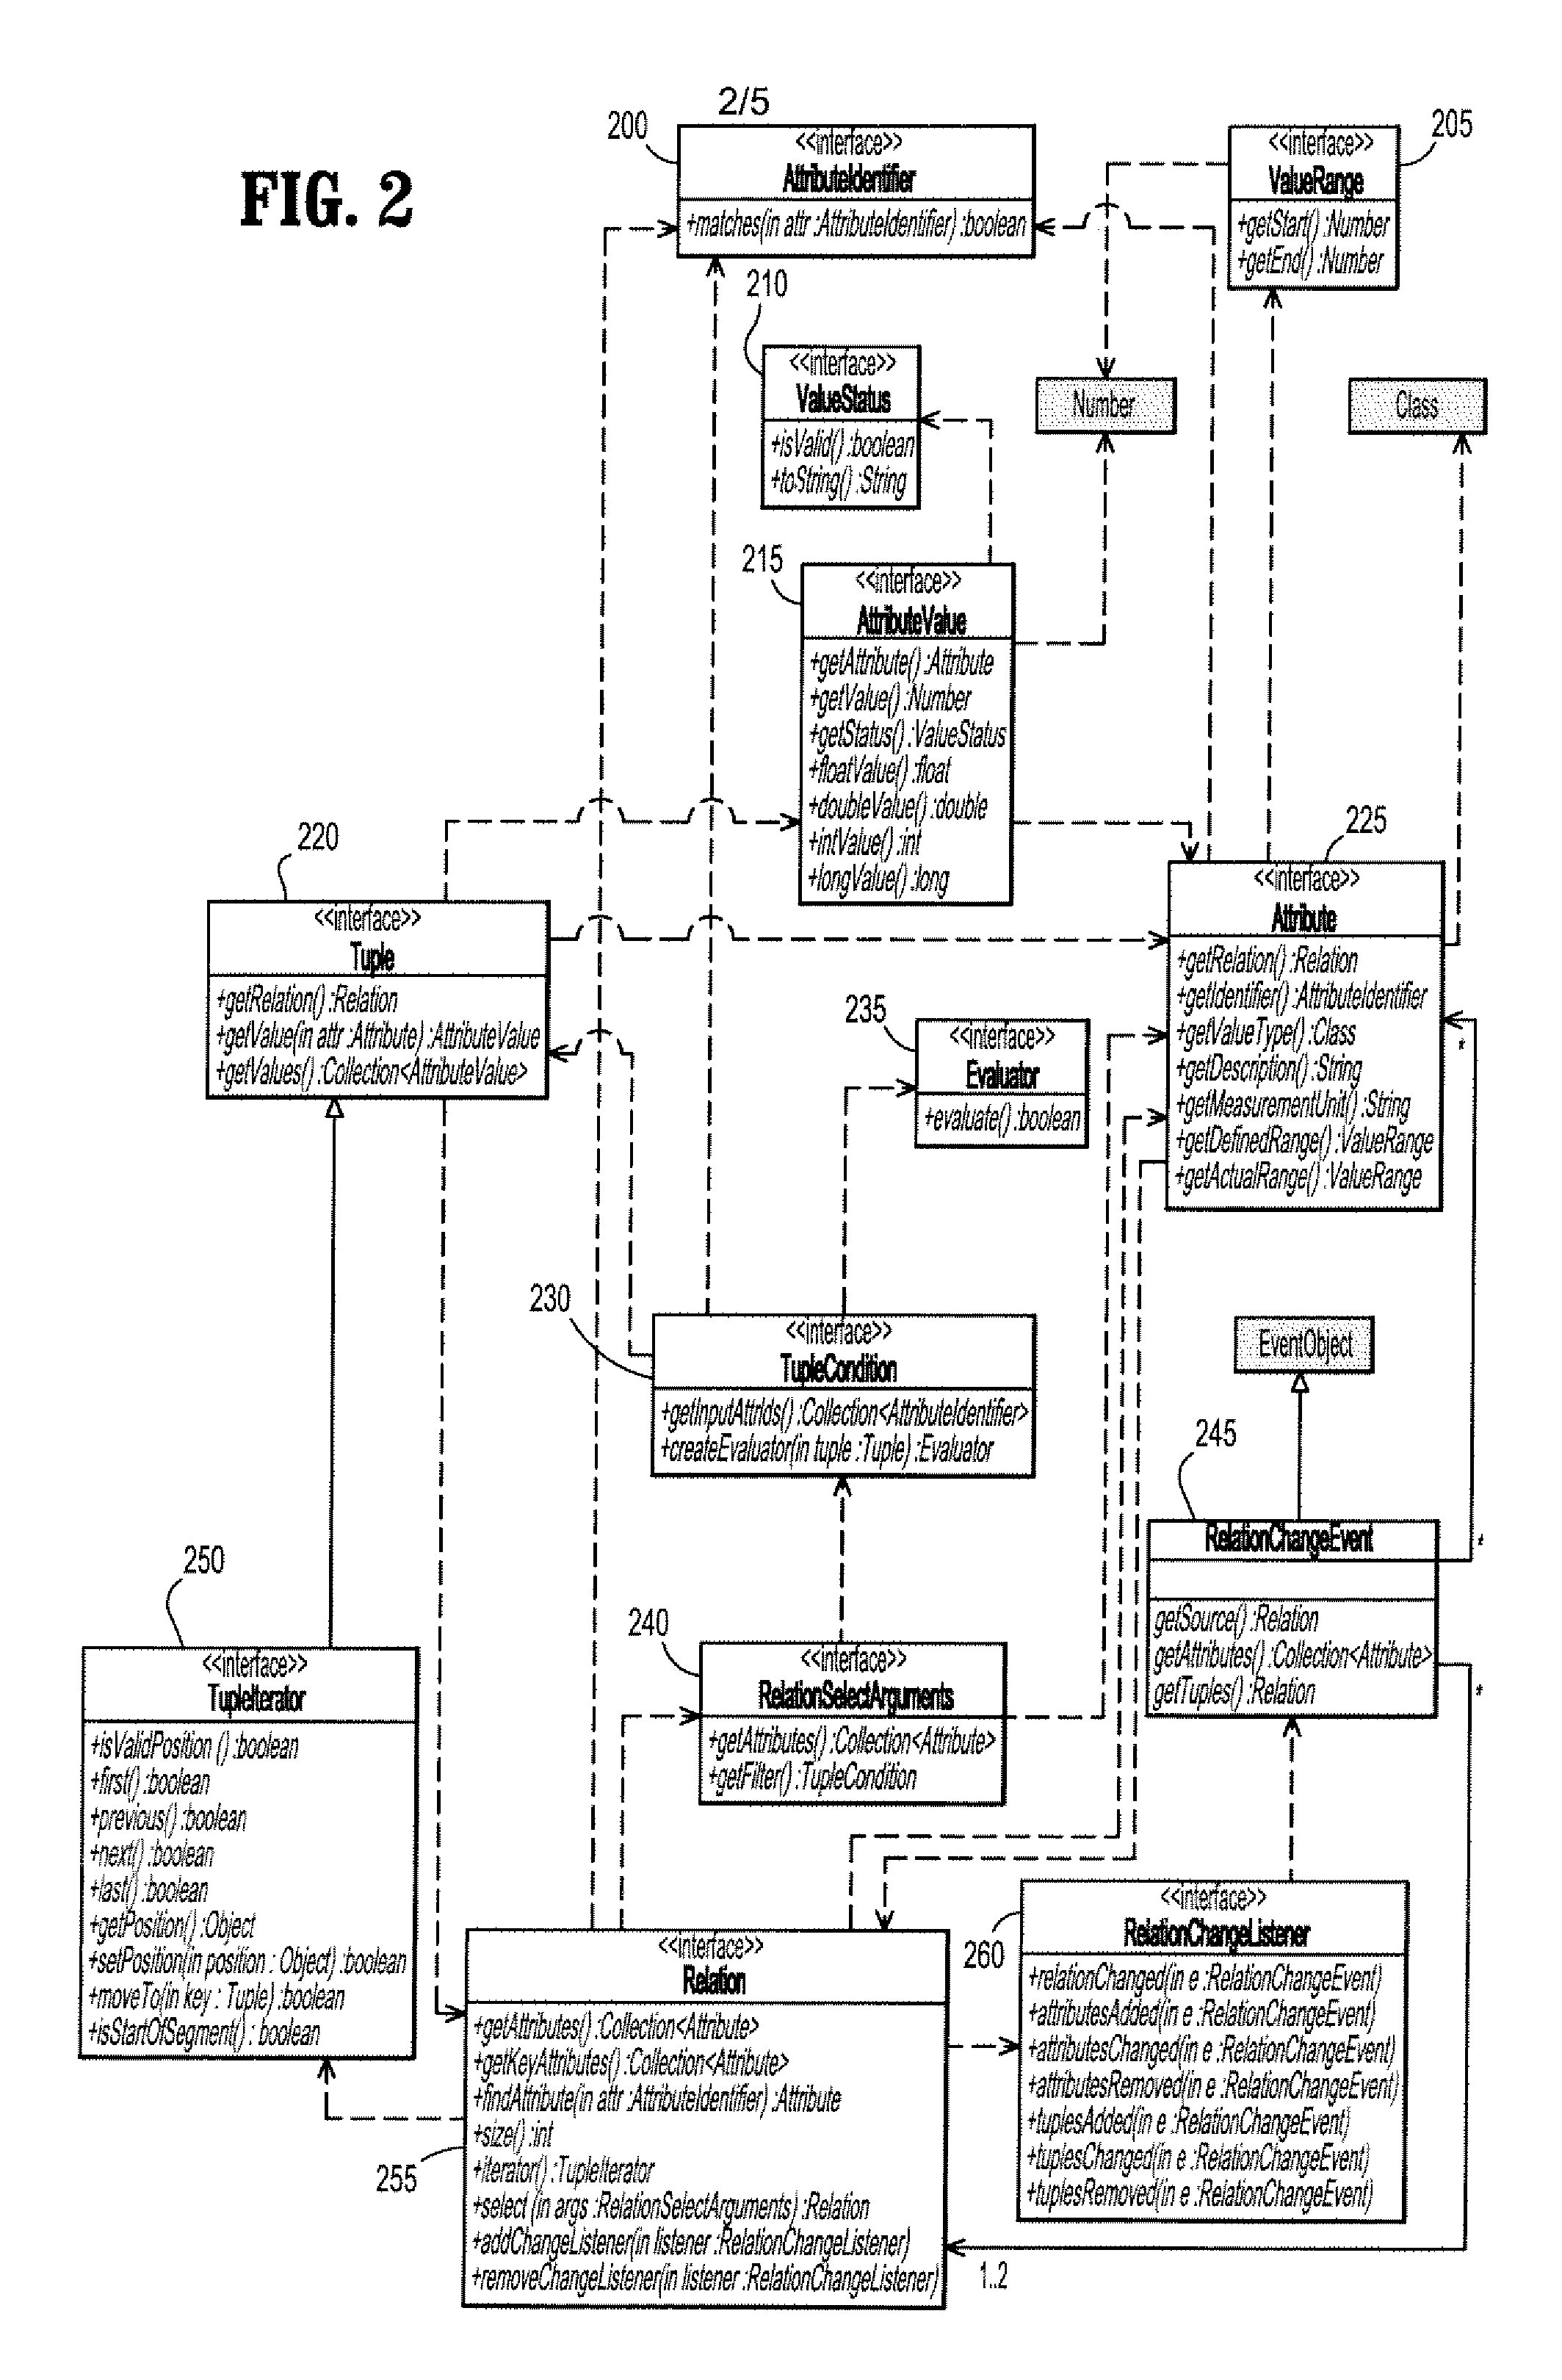 System and method for managing relational numerical data for monitoring systems